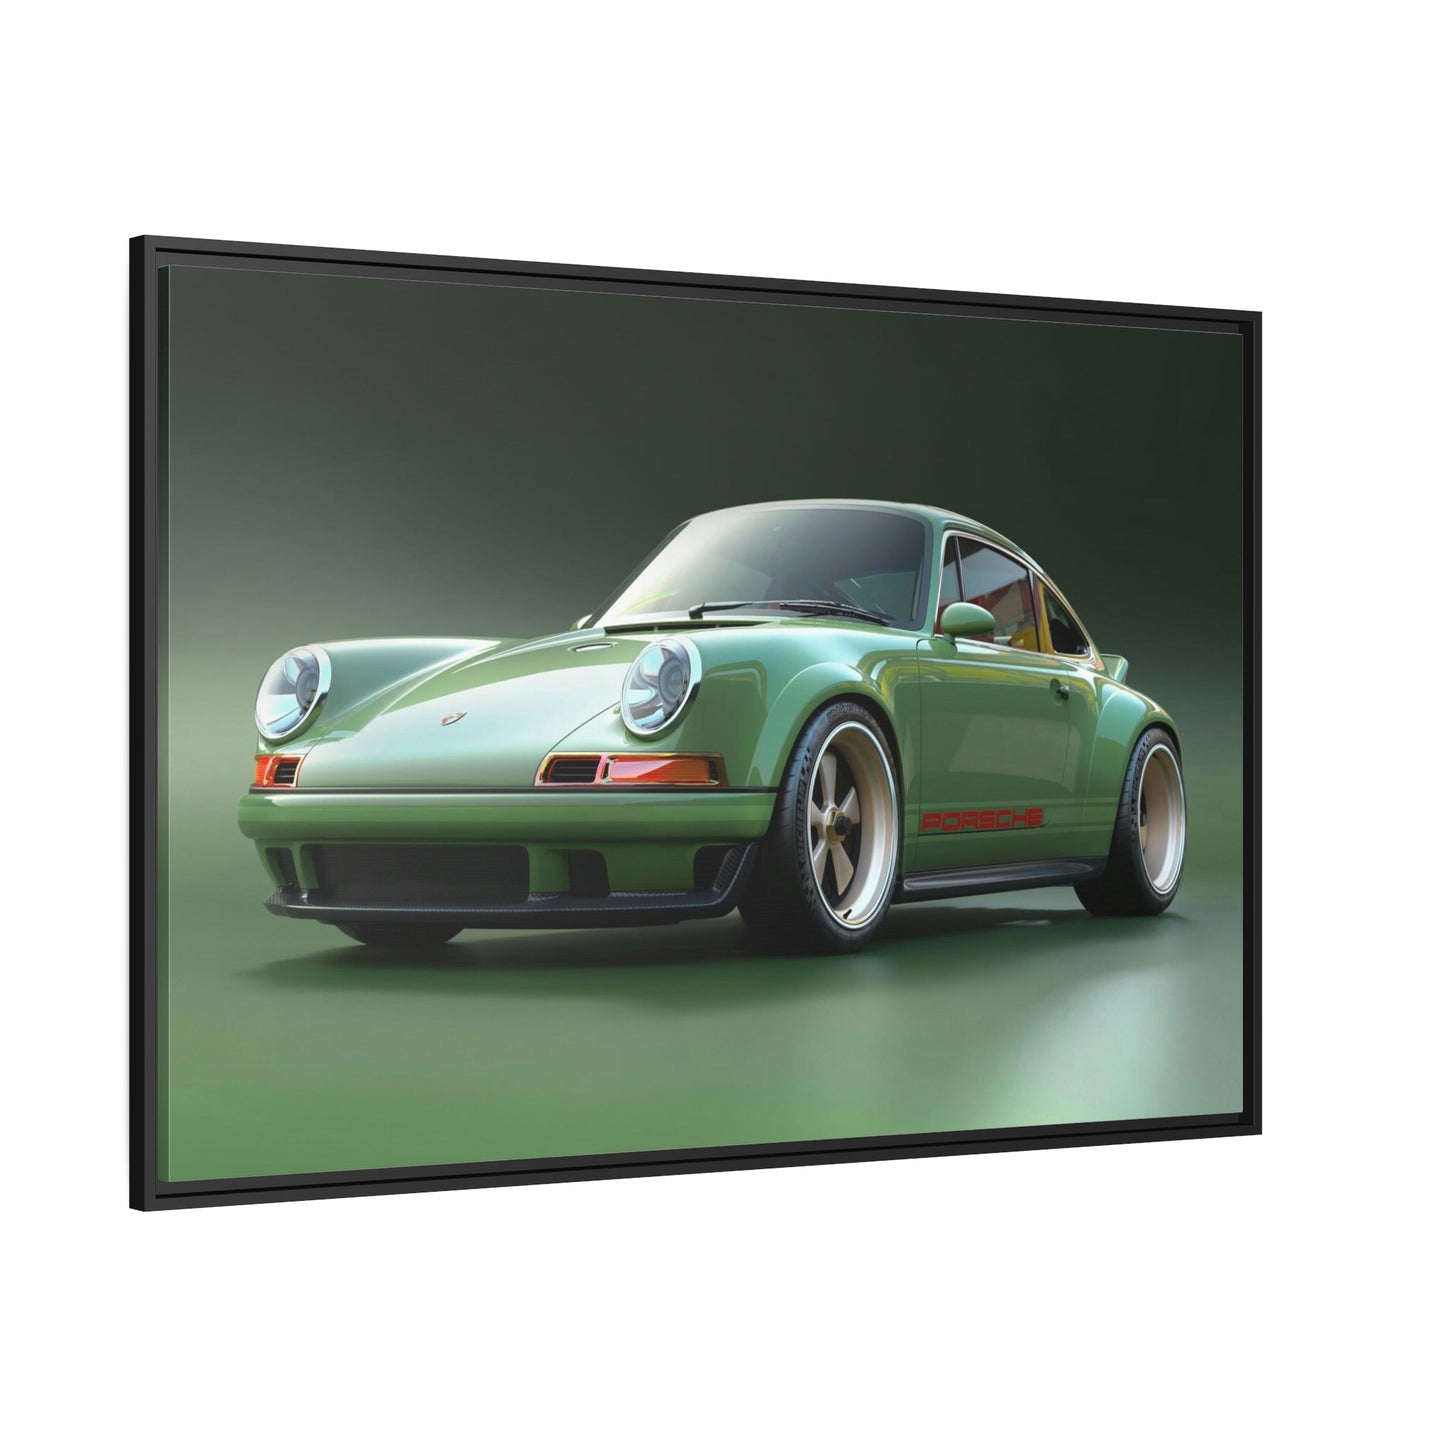 Porsche Dreams: Poster or Canvas Print for Inspiration and Motivation